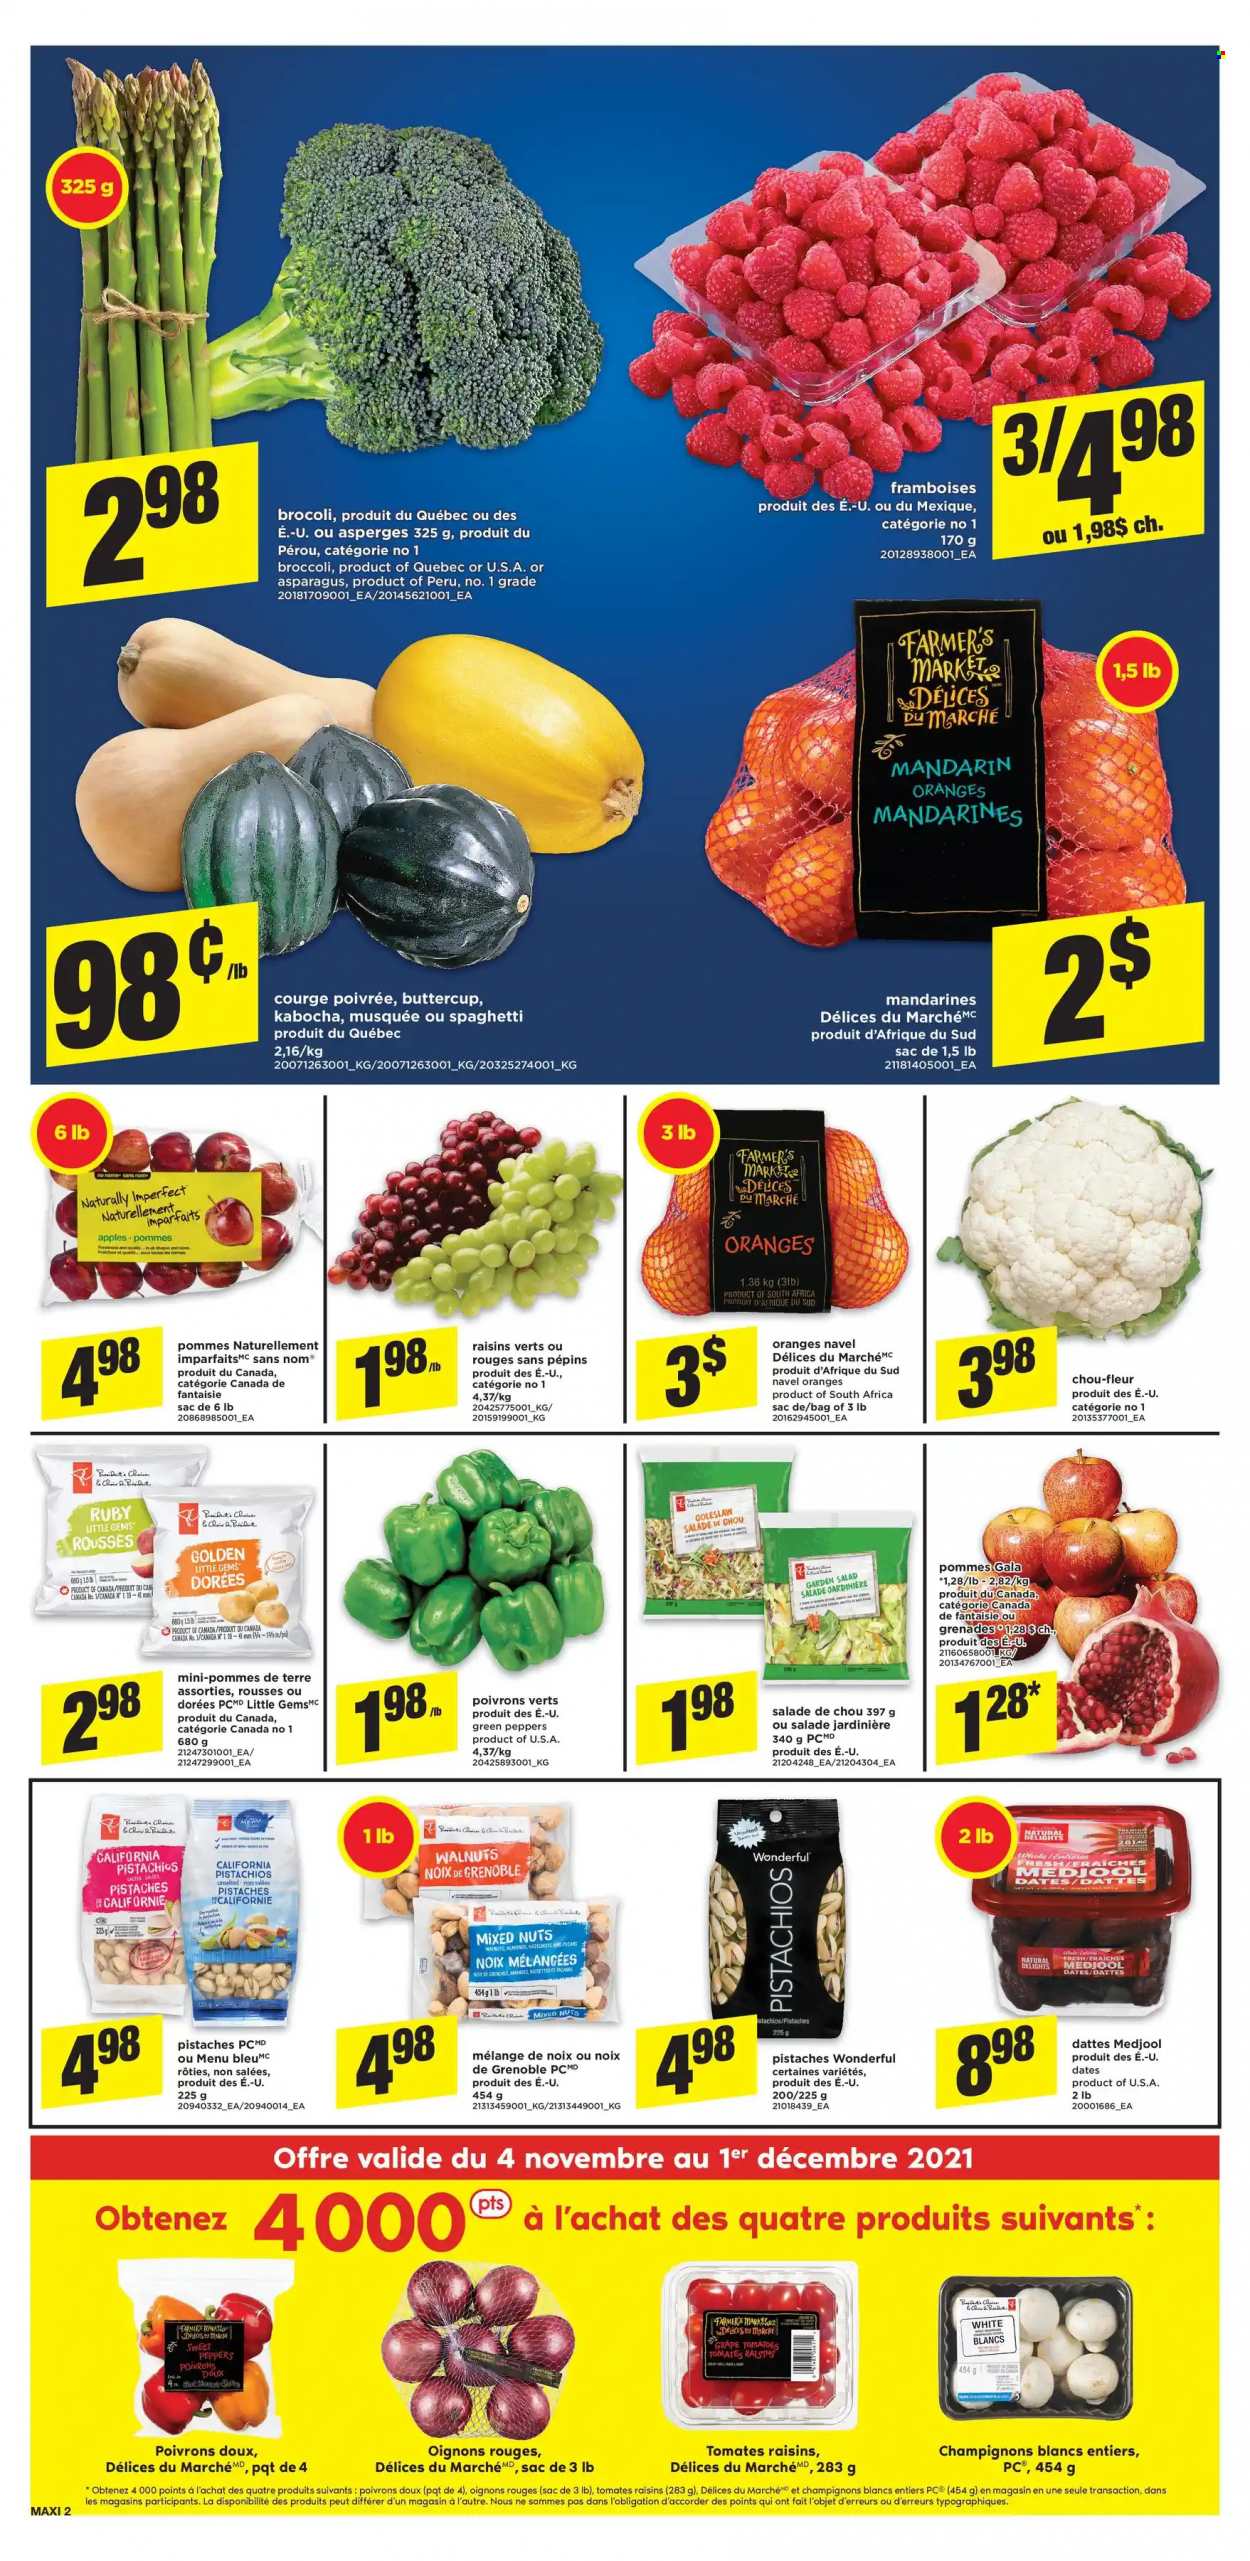 thumbnail - Maxi & Cie Flyer - November 04, 2021 - November 10, 2021 - Sales products - asparagus, broccoli, tomatoes, pumpkin, salad, peppers, apples, Gala, mandarines, navel oranges, No Name, coleslaw, spaghetti, almonds, walnuts, dried fruit, pistachios, dried dates, mixed nuts, raisins, oranges. Page 3.